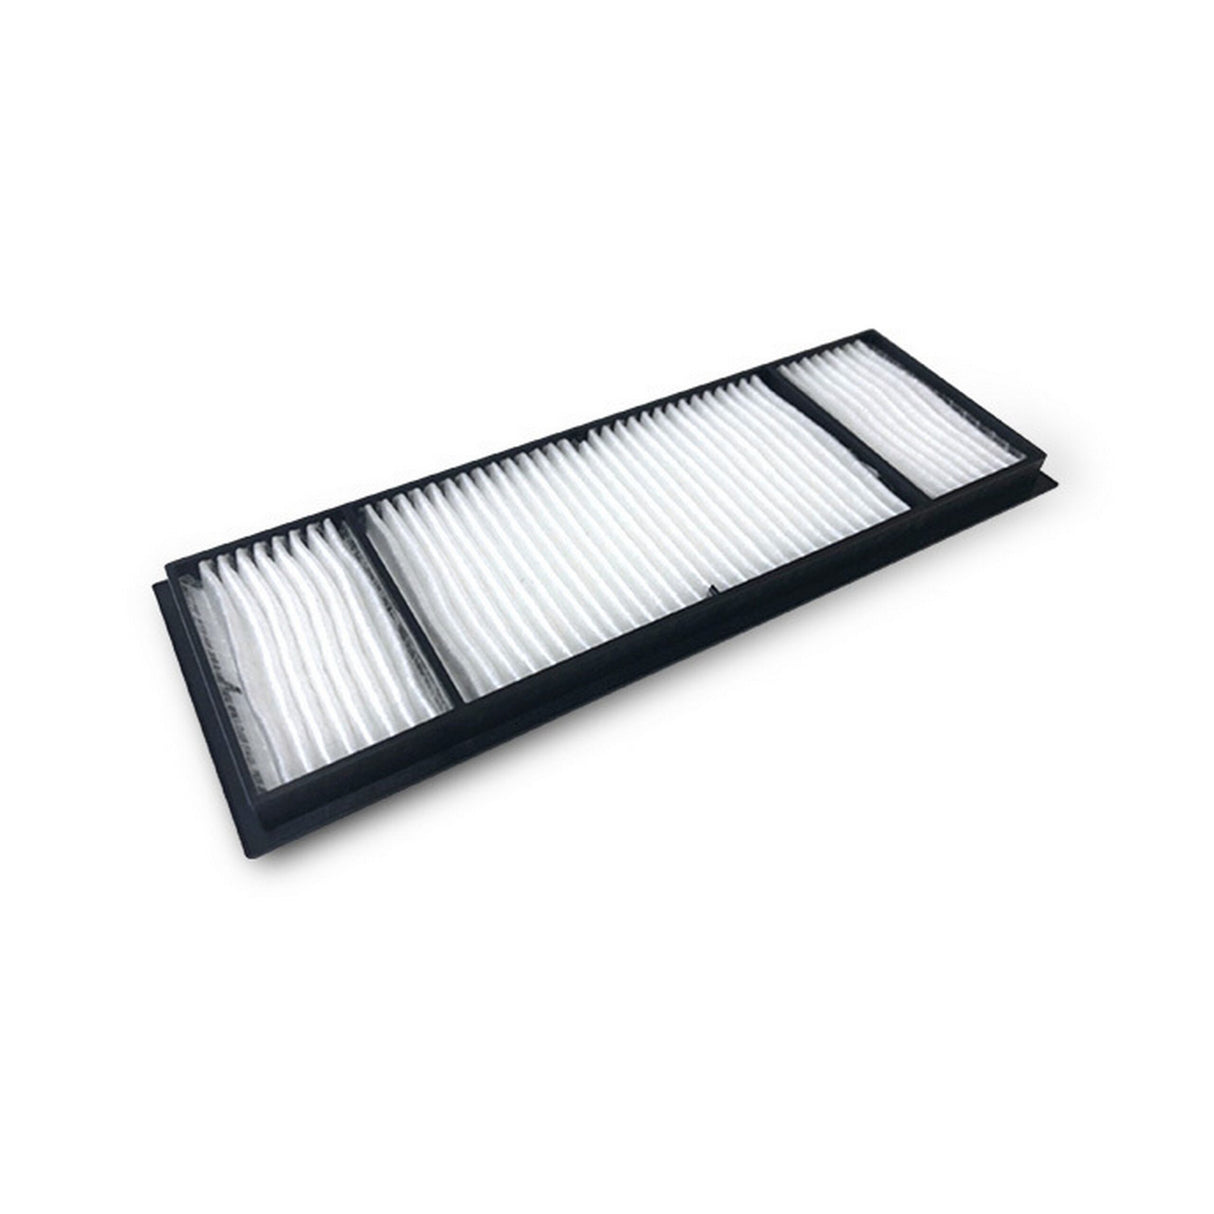 Epson V13H134A60 Replacement Air Filter for PowerLite L200/250 Series and PowerLite/BrightLink 700 Series